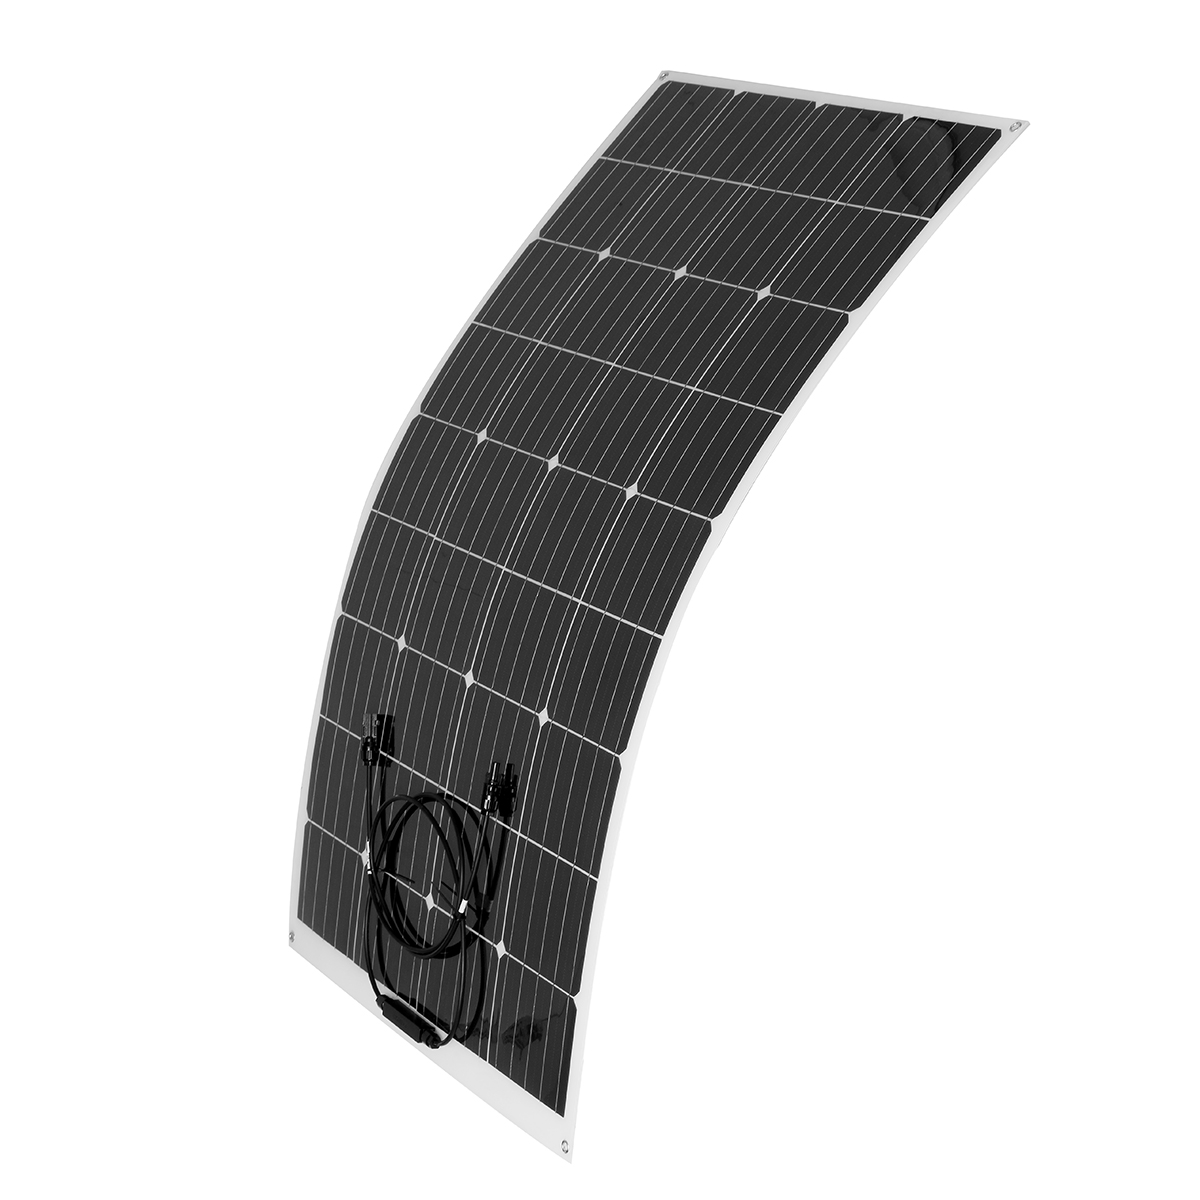 130W-18V-Highly-Flexible-Monocrystalline-Solar-Panel-Connector-Car-Boat-Camping-1664111-6